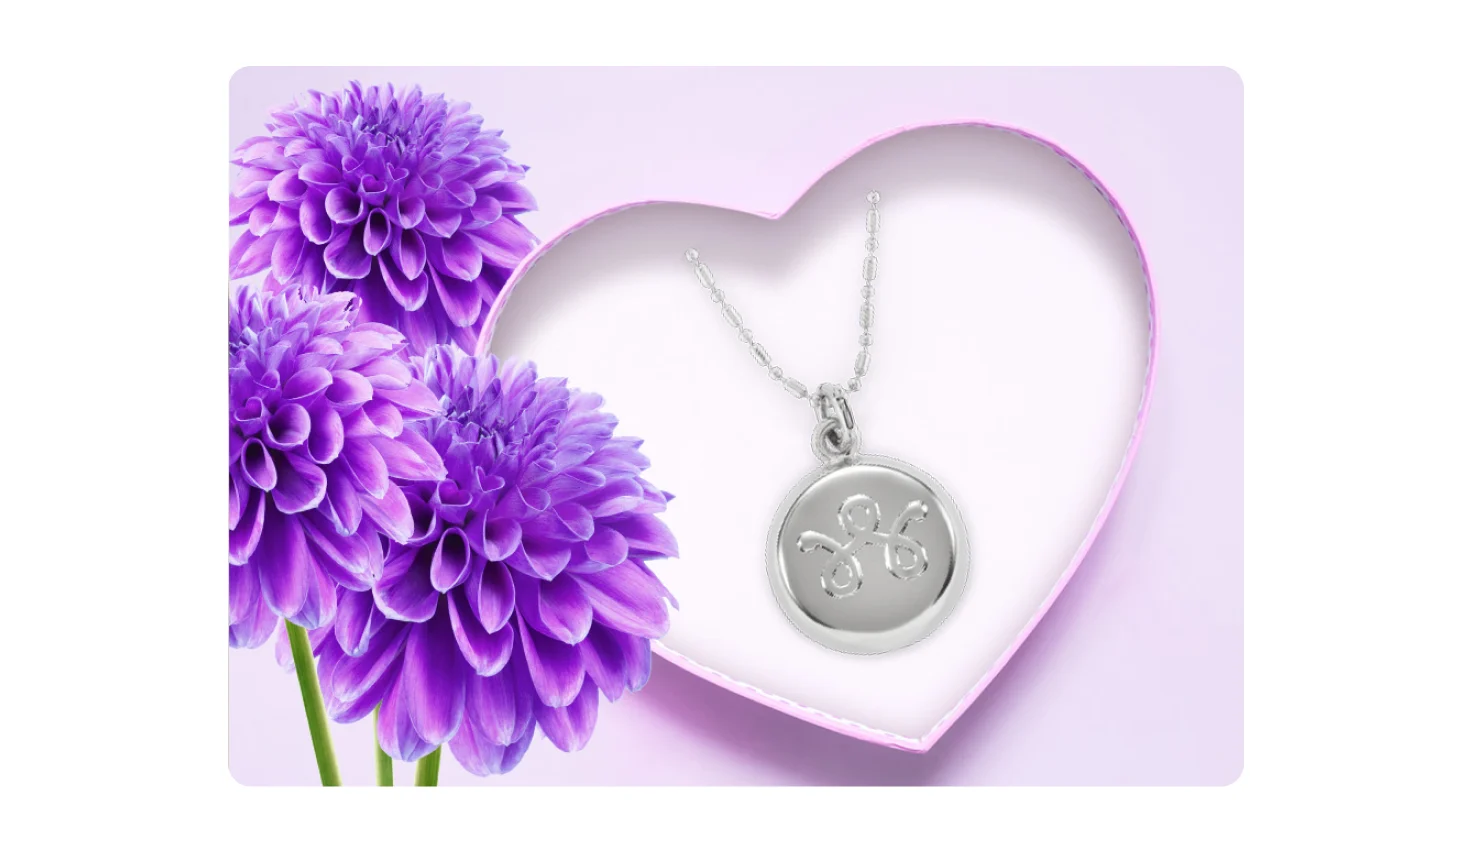 A heart-shaped box containing a silver necklace with a charm, placed next to vibrant purple dahlias, symbolizes the precious gift of security that SmartWear offers to your loved ones.